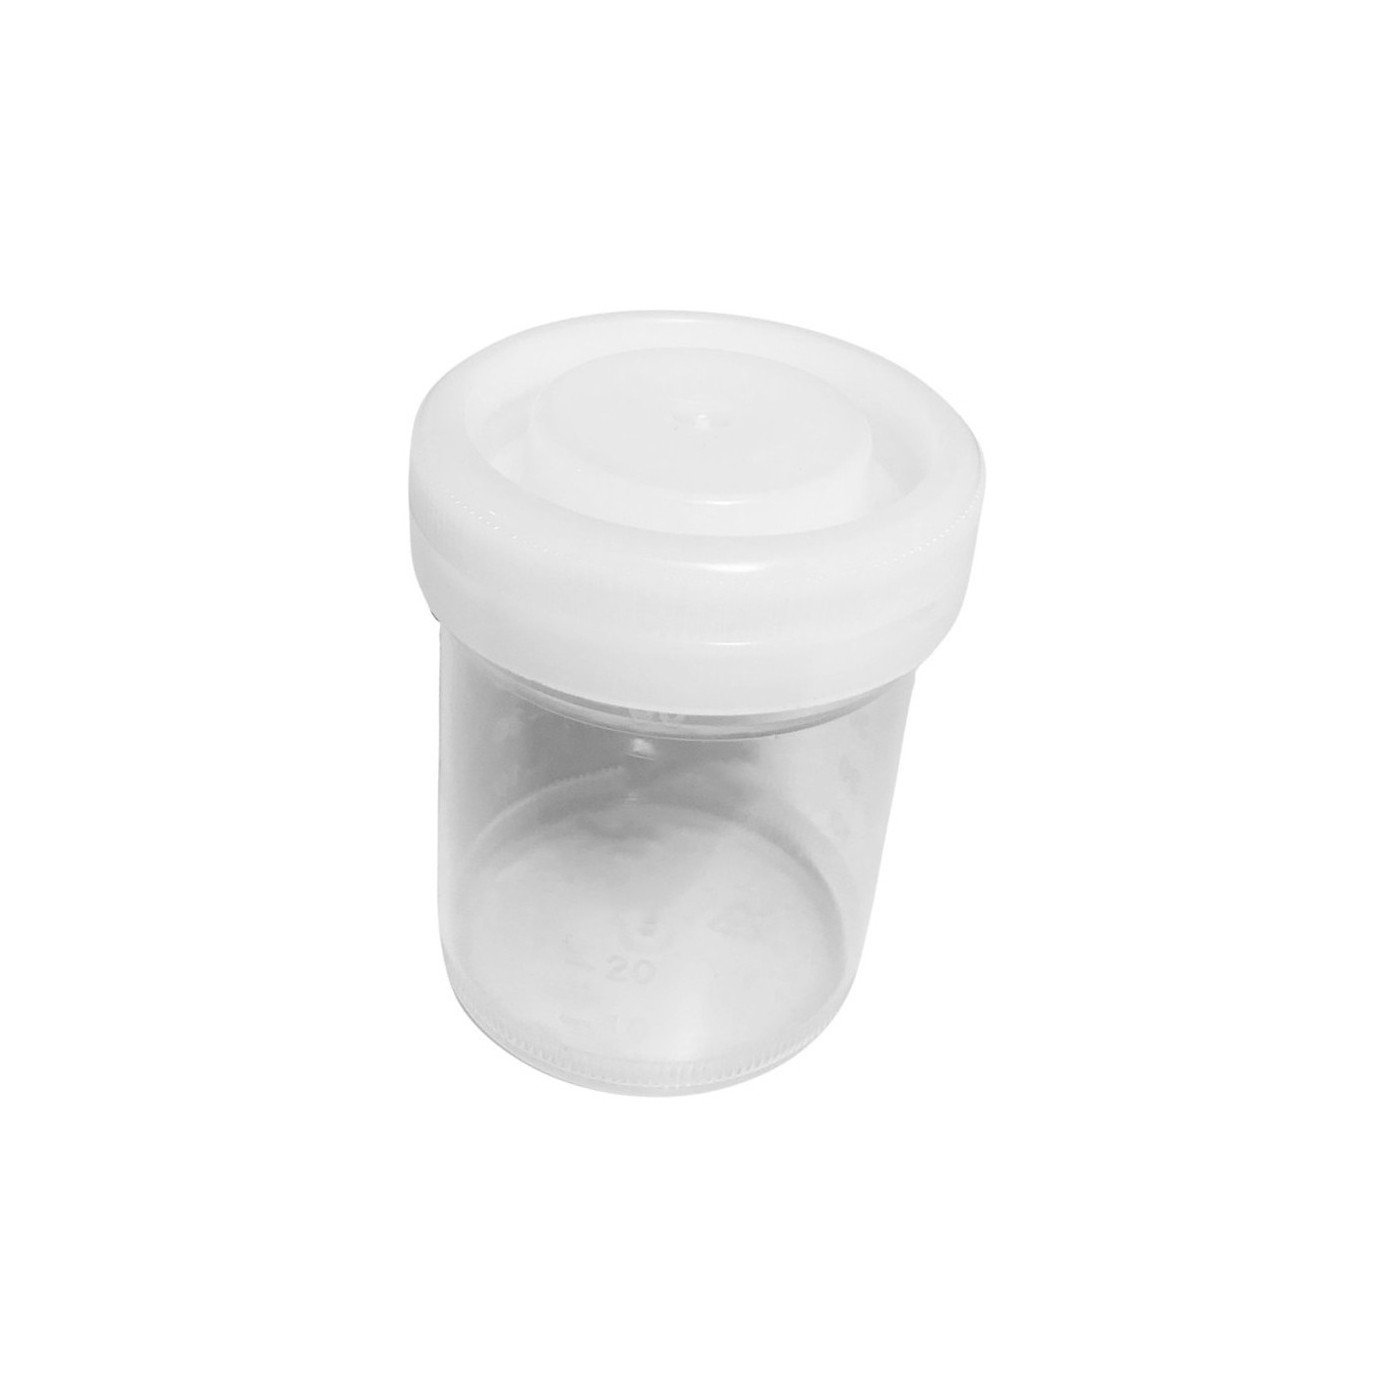 Set of 50 sample containers, 120 ml with screw caps